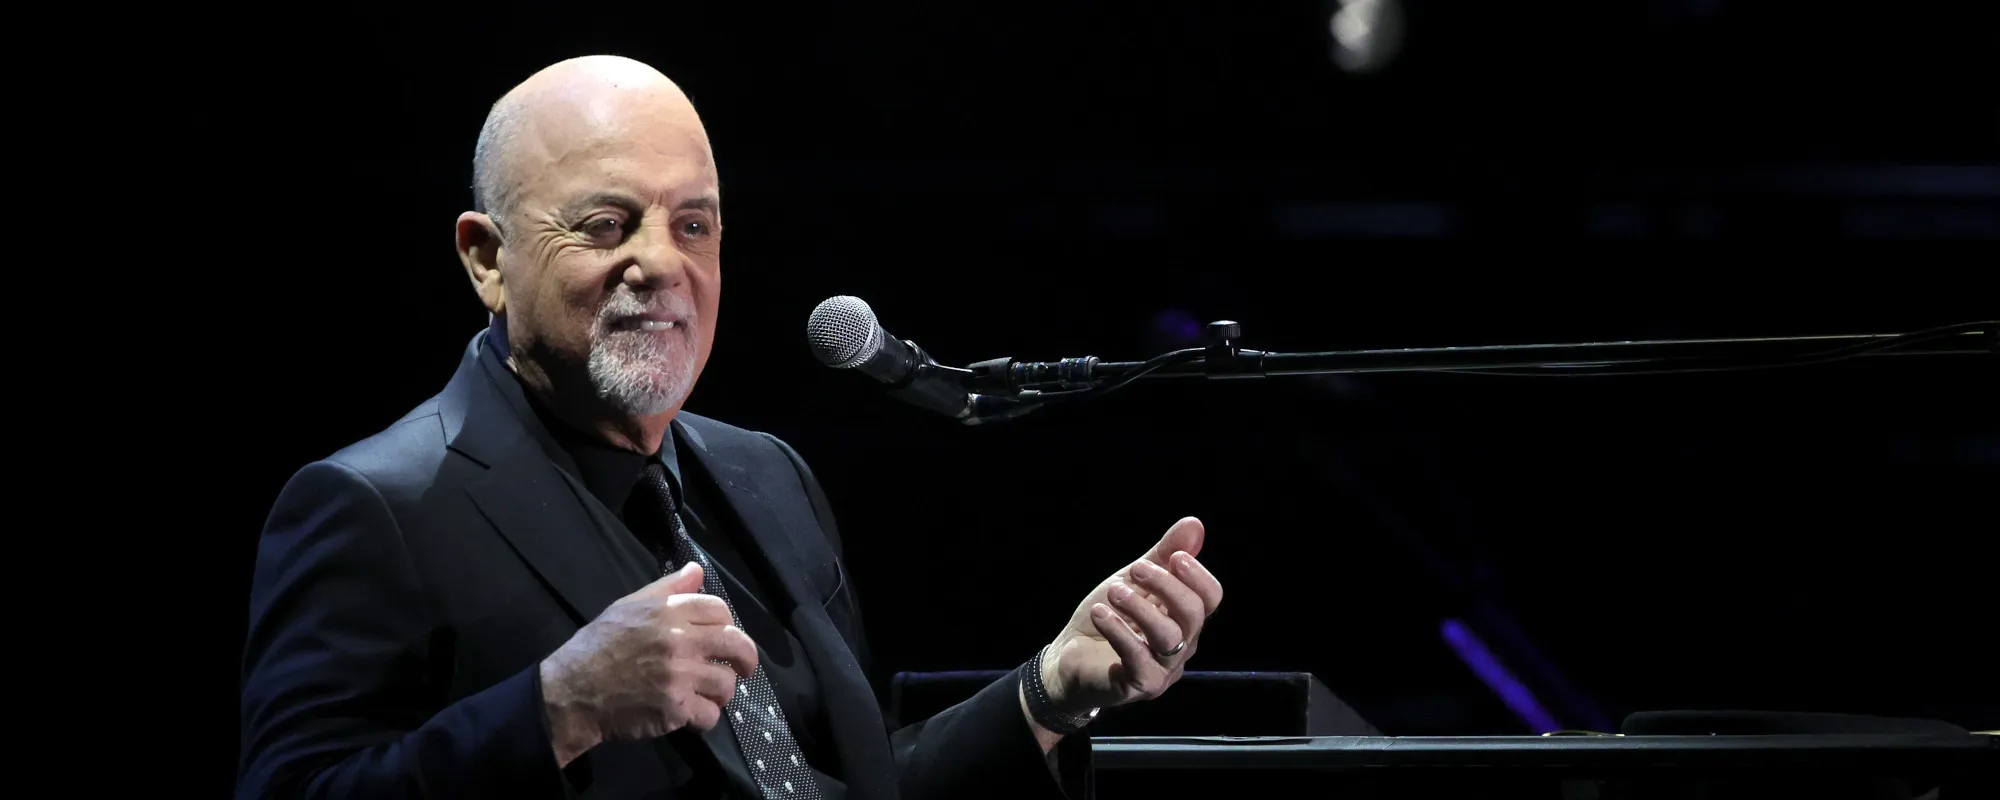 Behind the Meaning of the Classic Piano Bar Song, “Piano Man” by Billy Joel